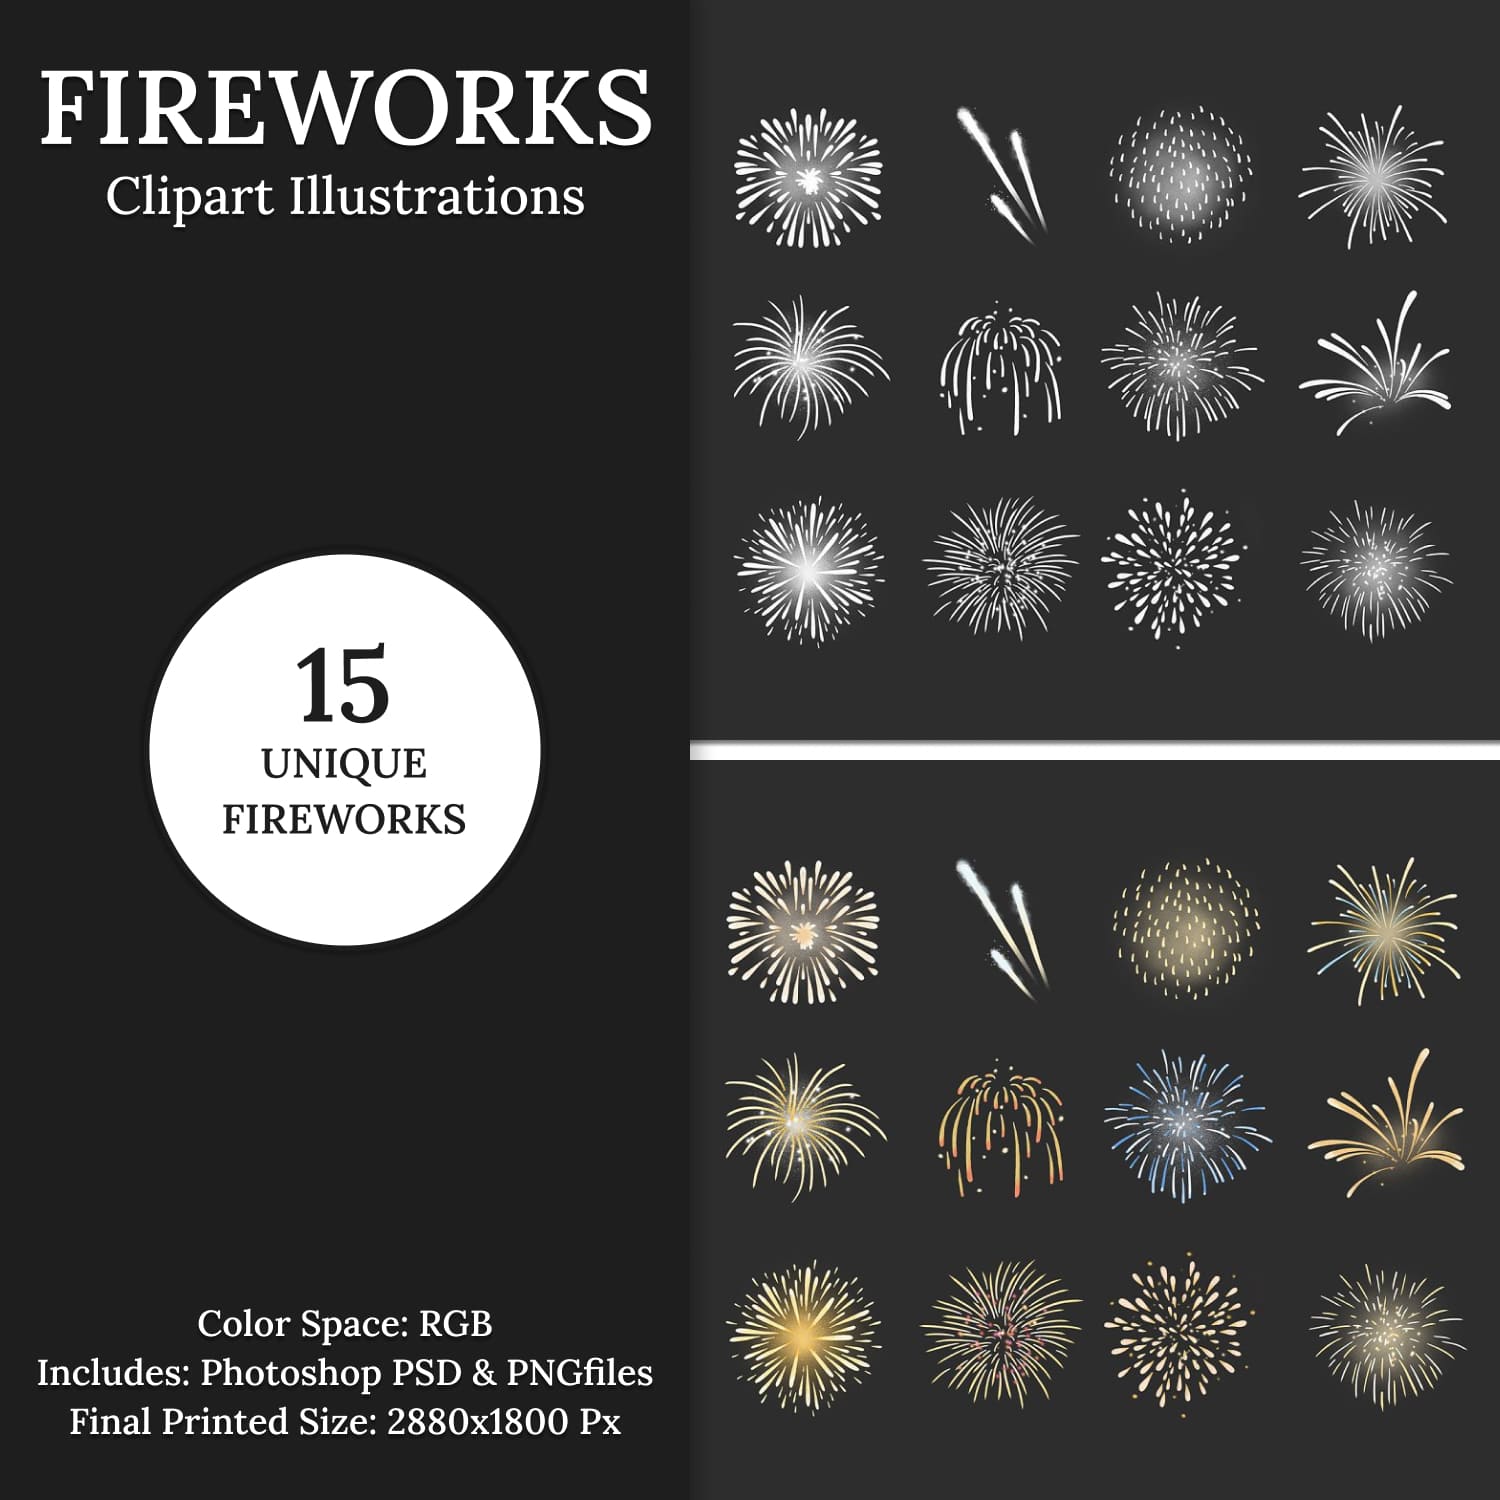 Fireworks Vector Clipart - main image preview.